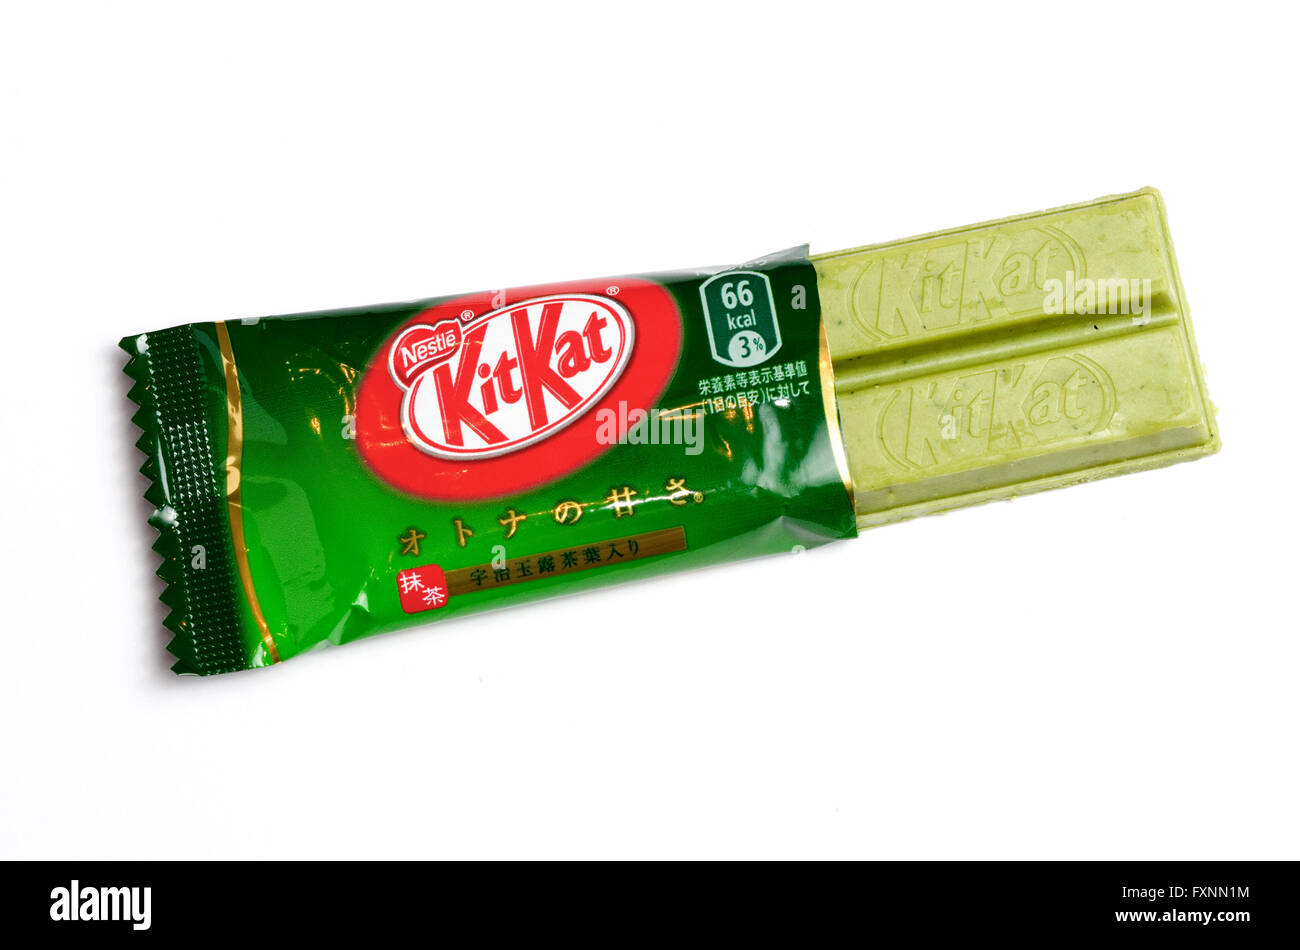 Unusual Japanese Kitkat flavours. Matcha green tea flavour showing the green chocolate. Stock Photo